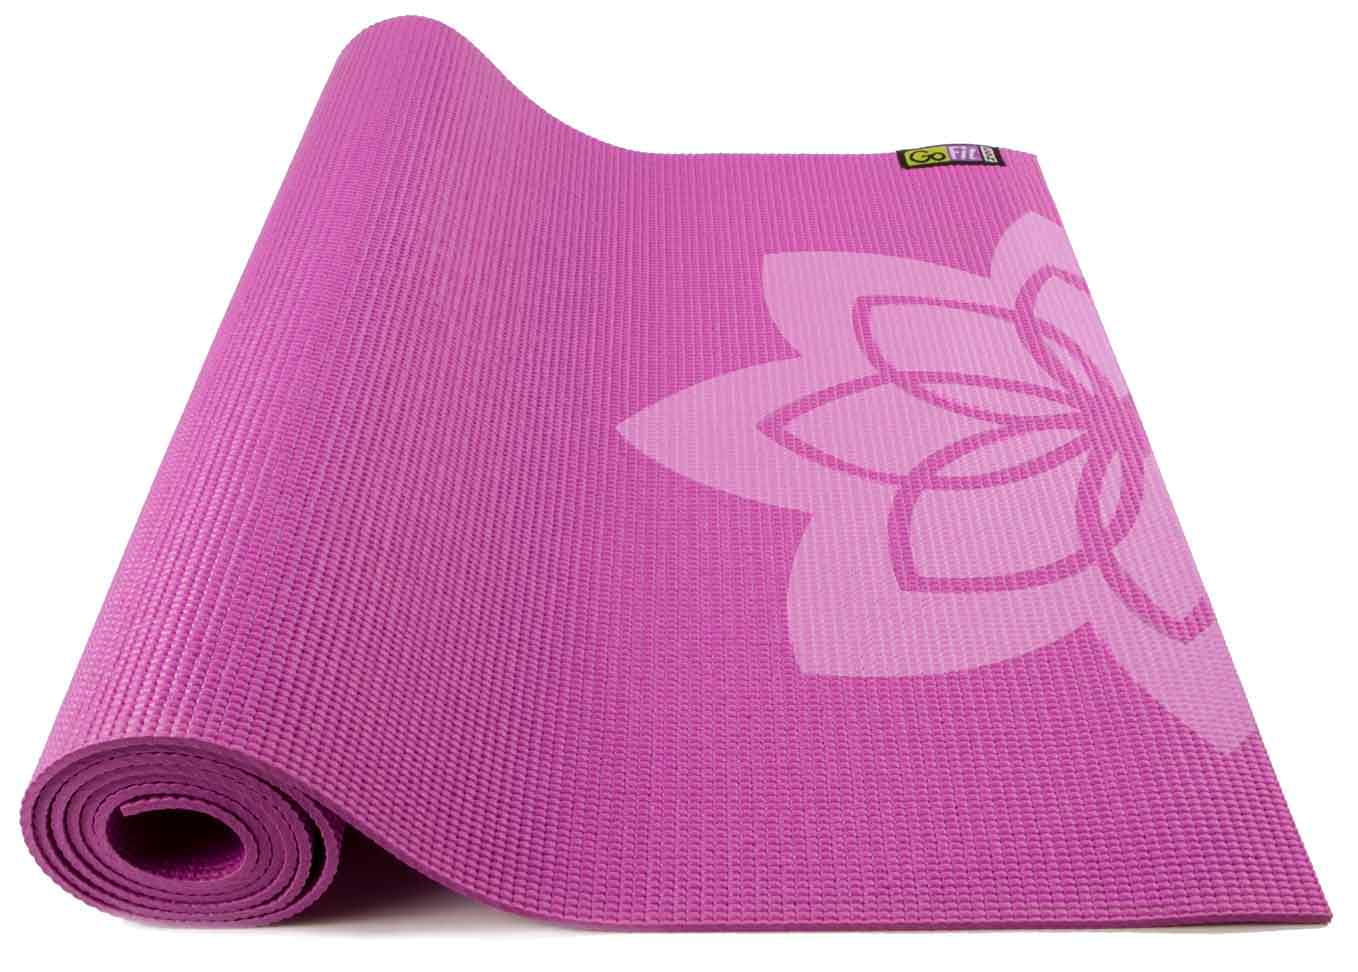 Yoga Mat for Men and Women, 1.5 mm Thick Extra Long and Wide